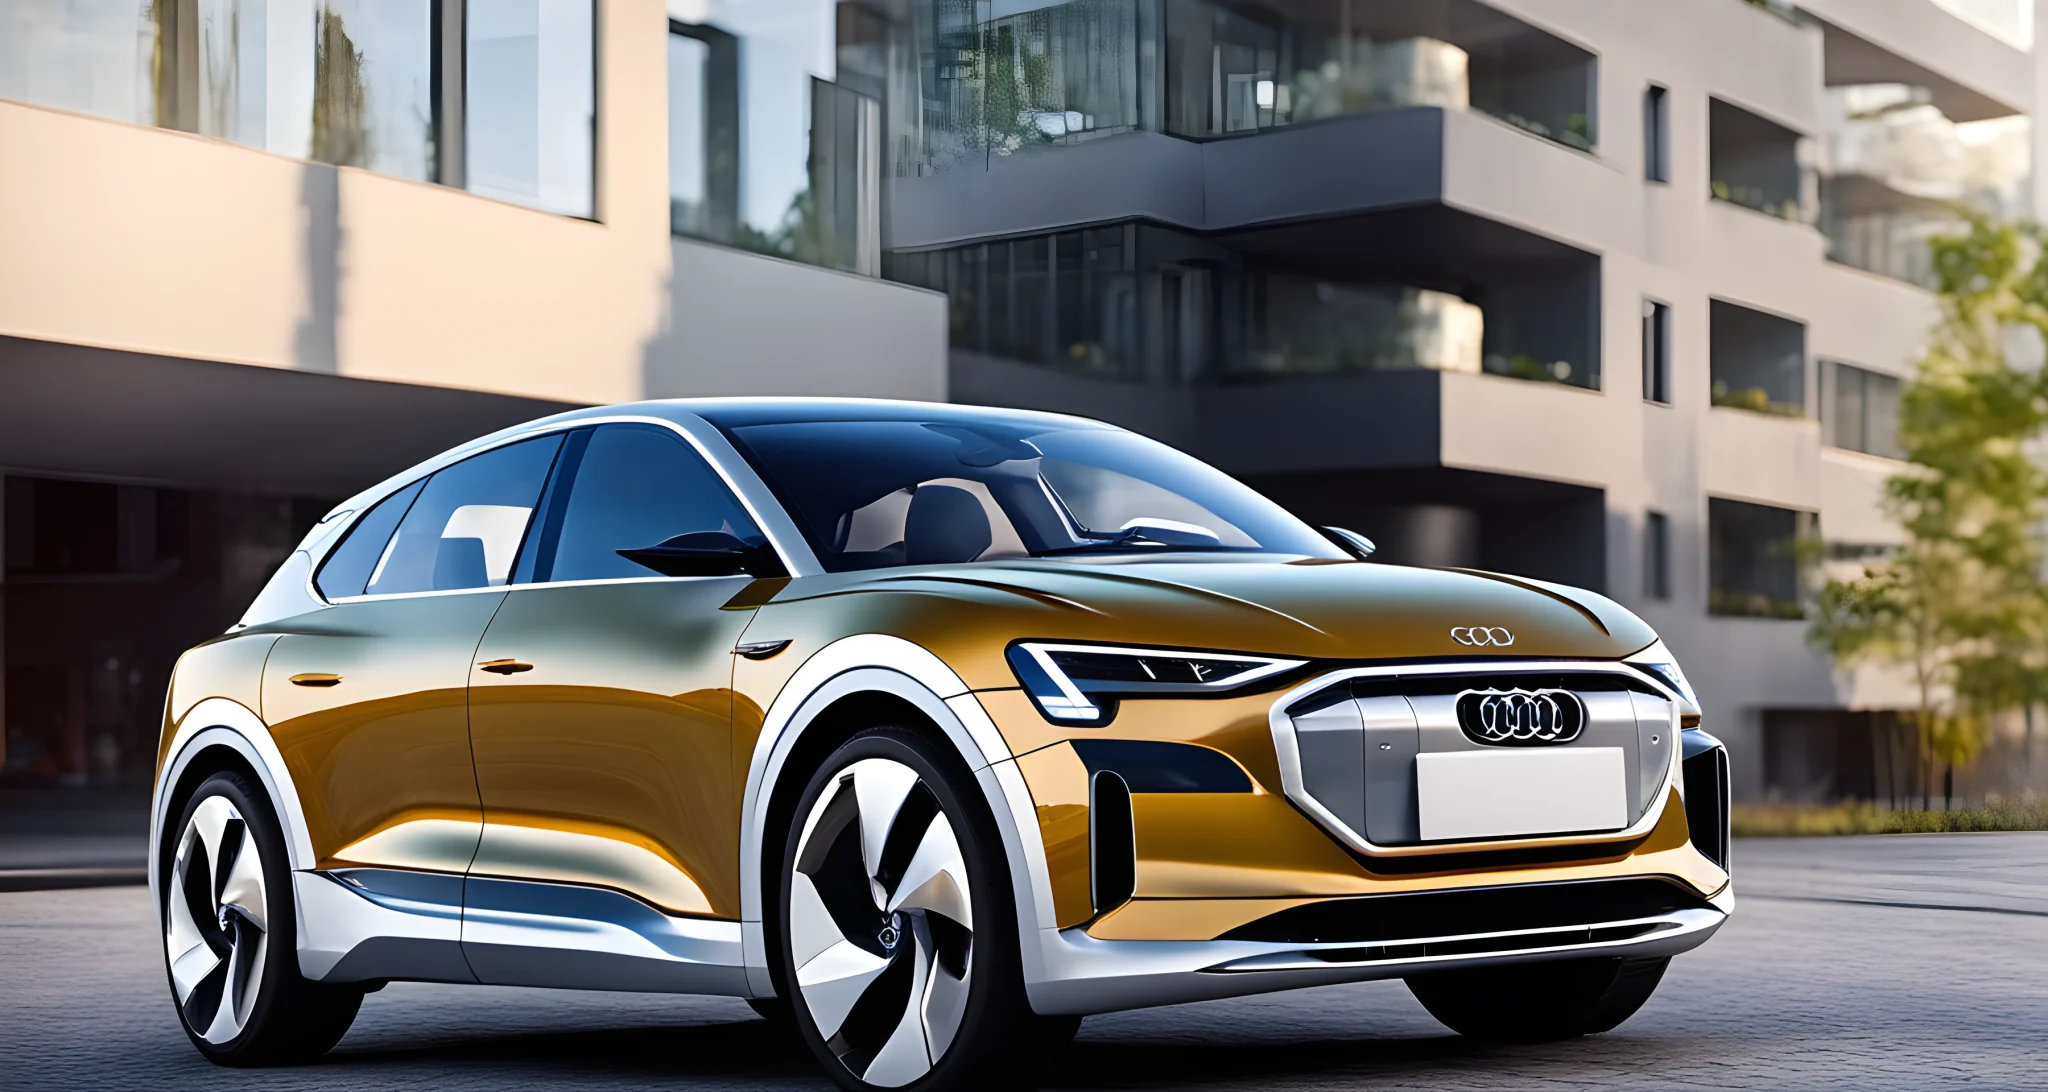 The image shows the latest model of an eco-friendly electric Audi car, with a focus on its sleek design and advanced technology.